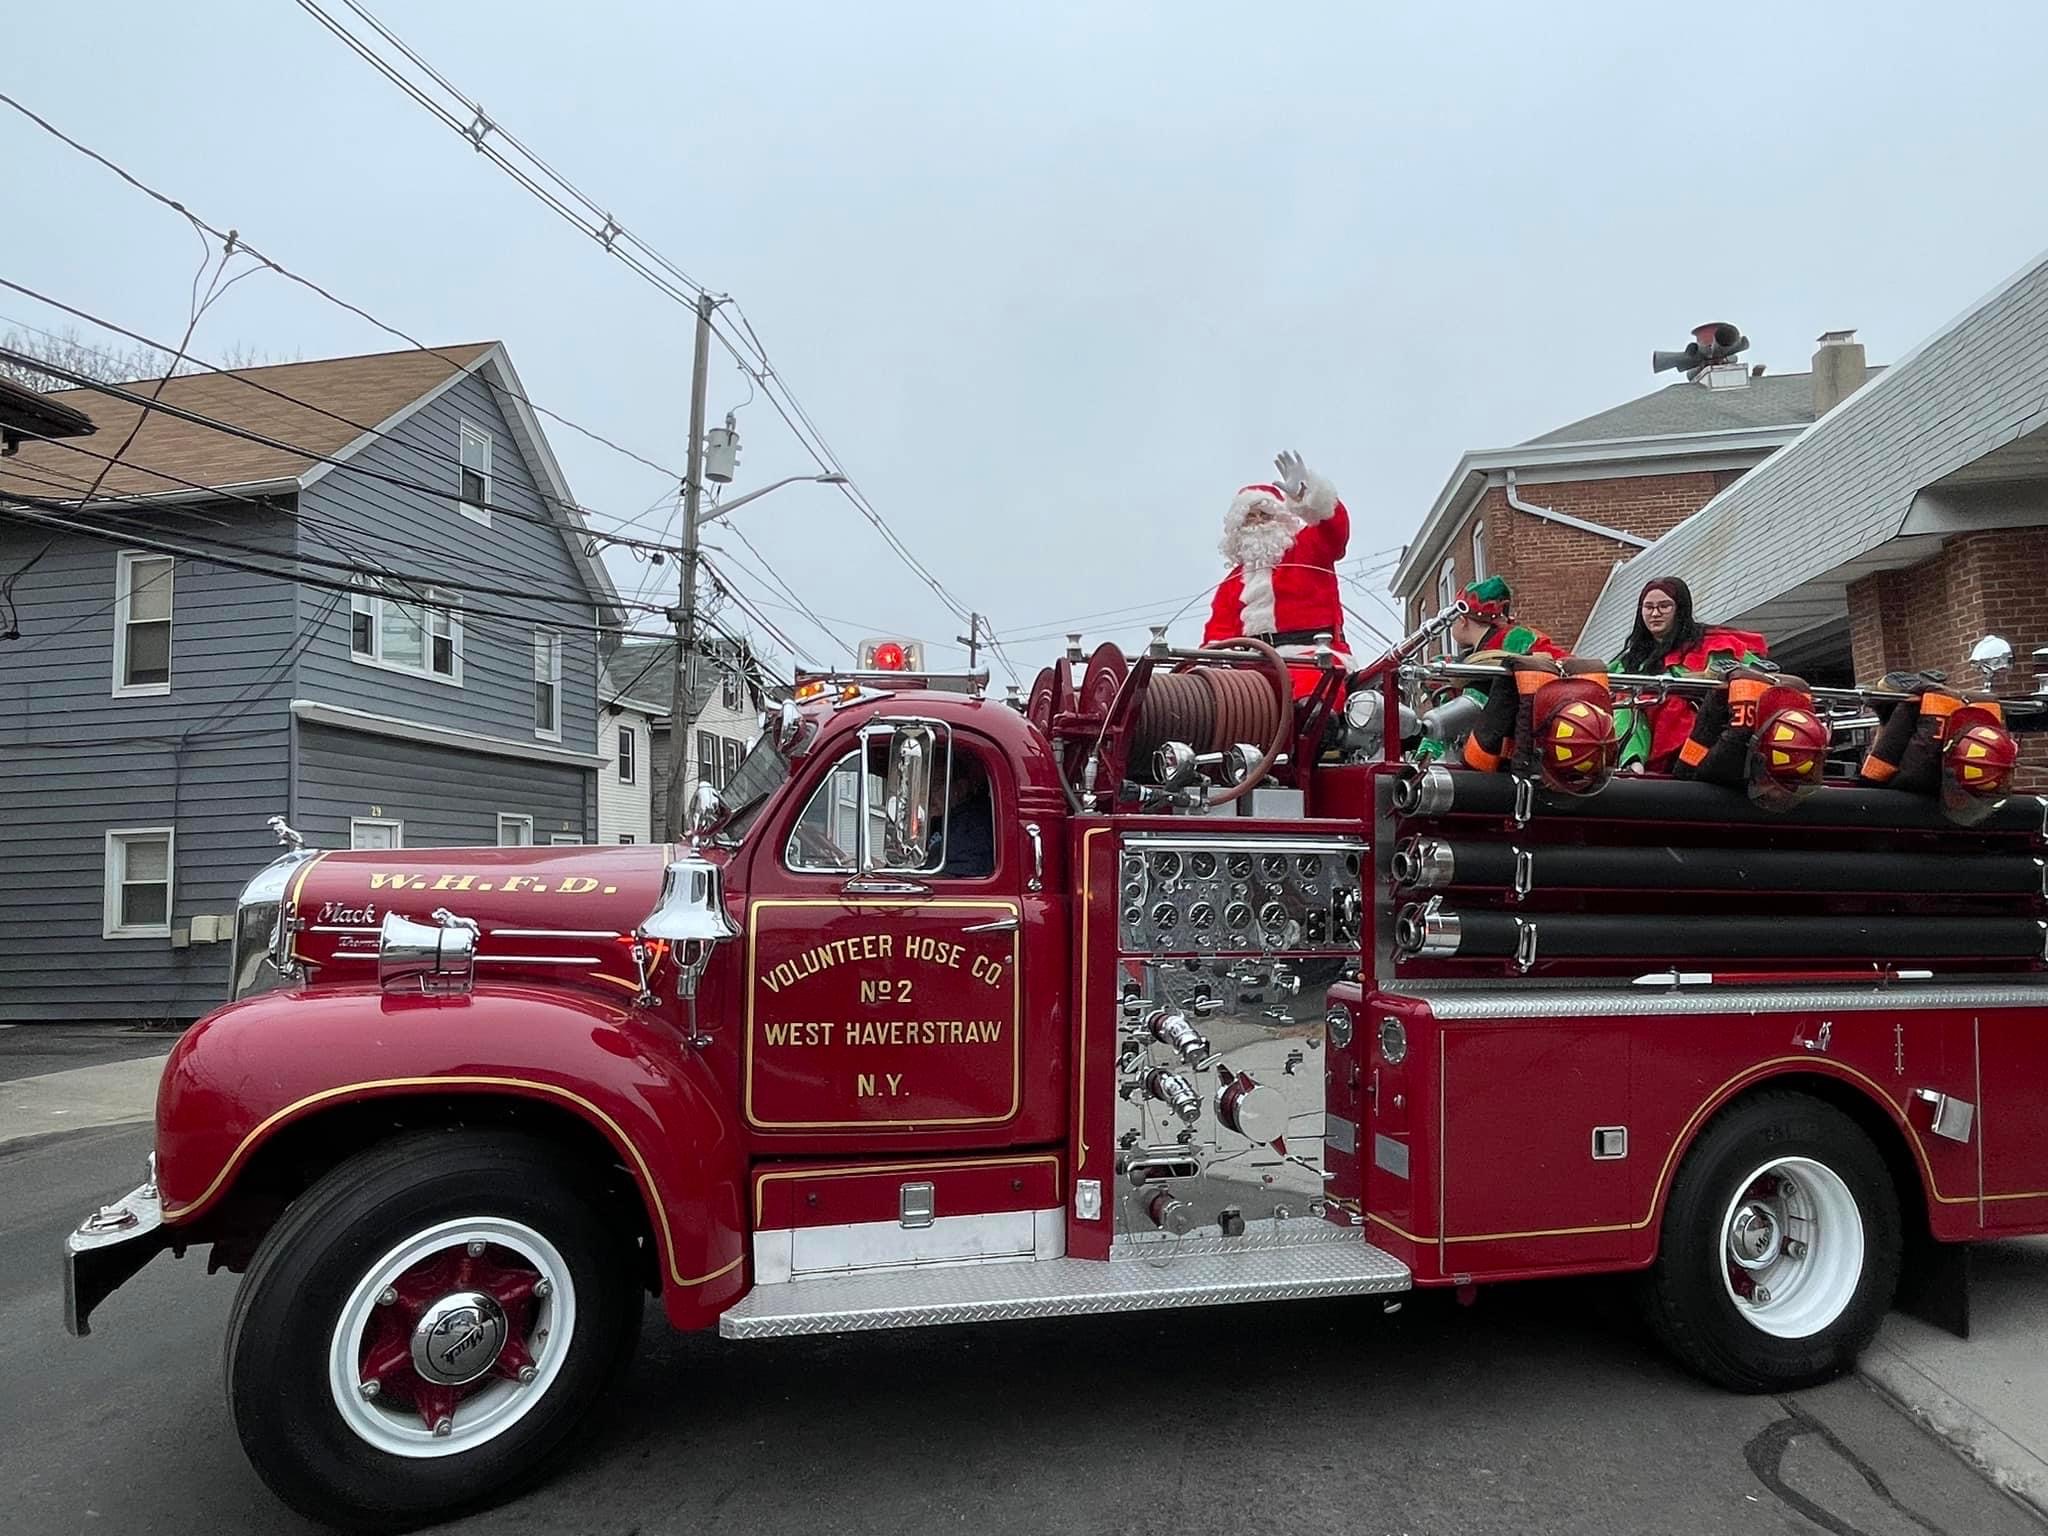 Santa Claus on top of a firetruck